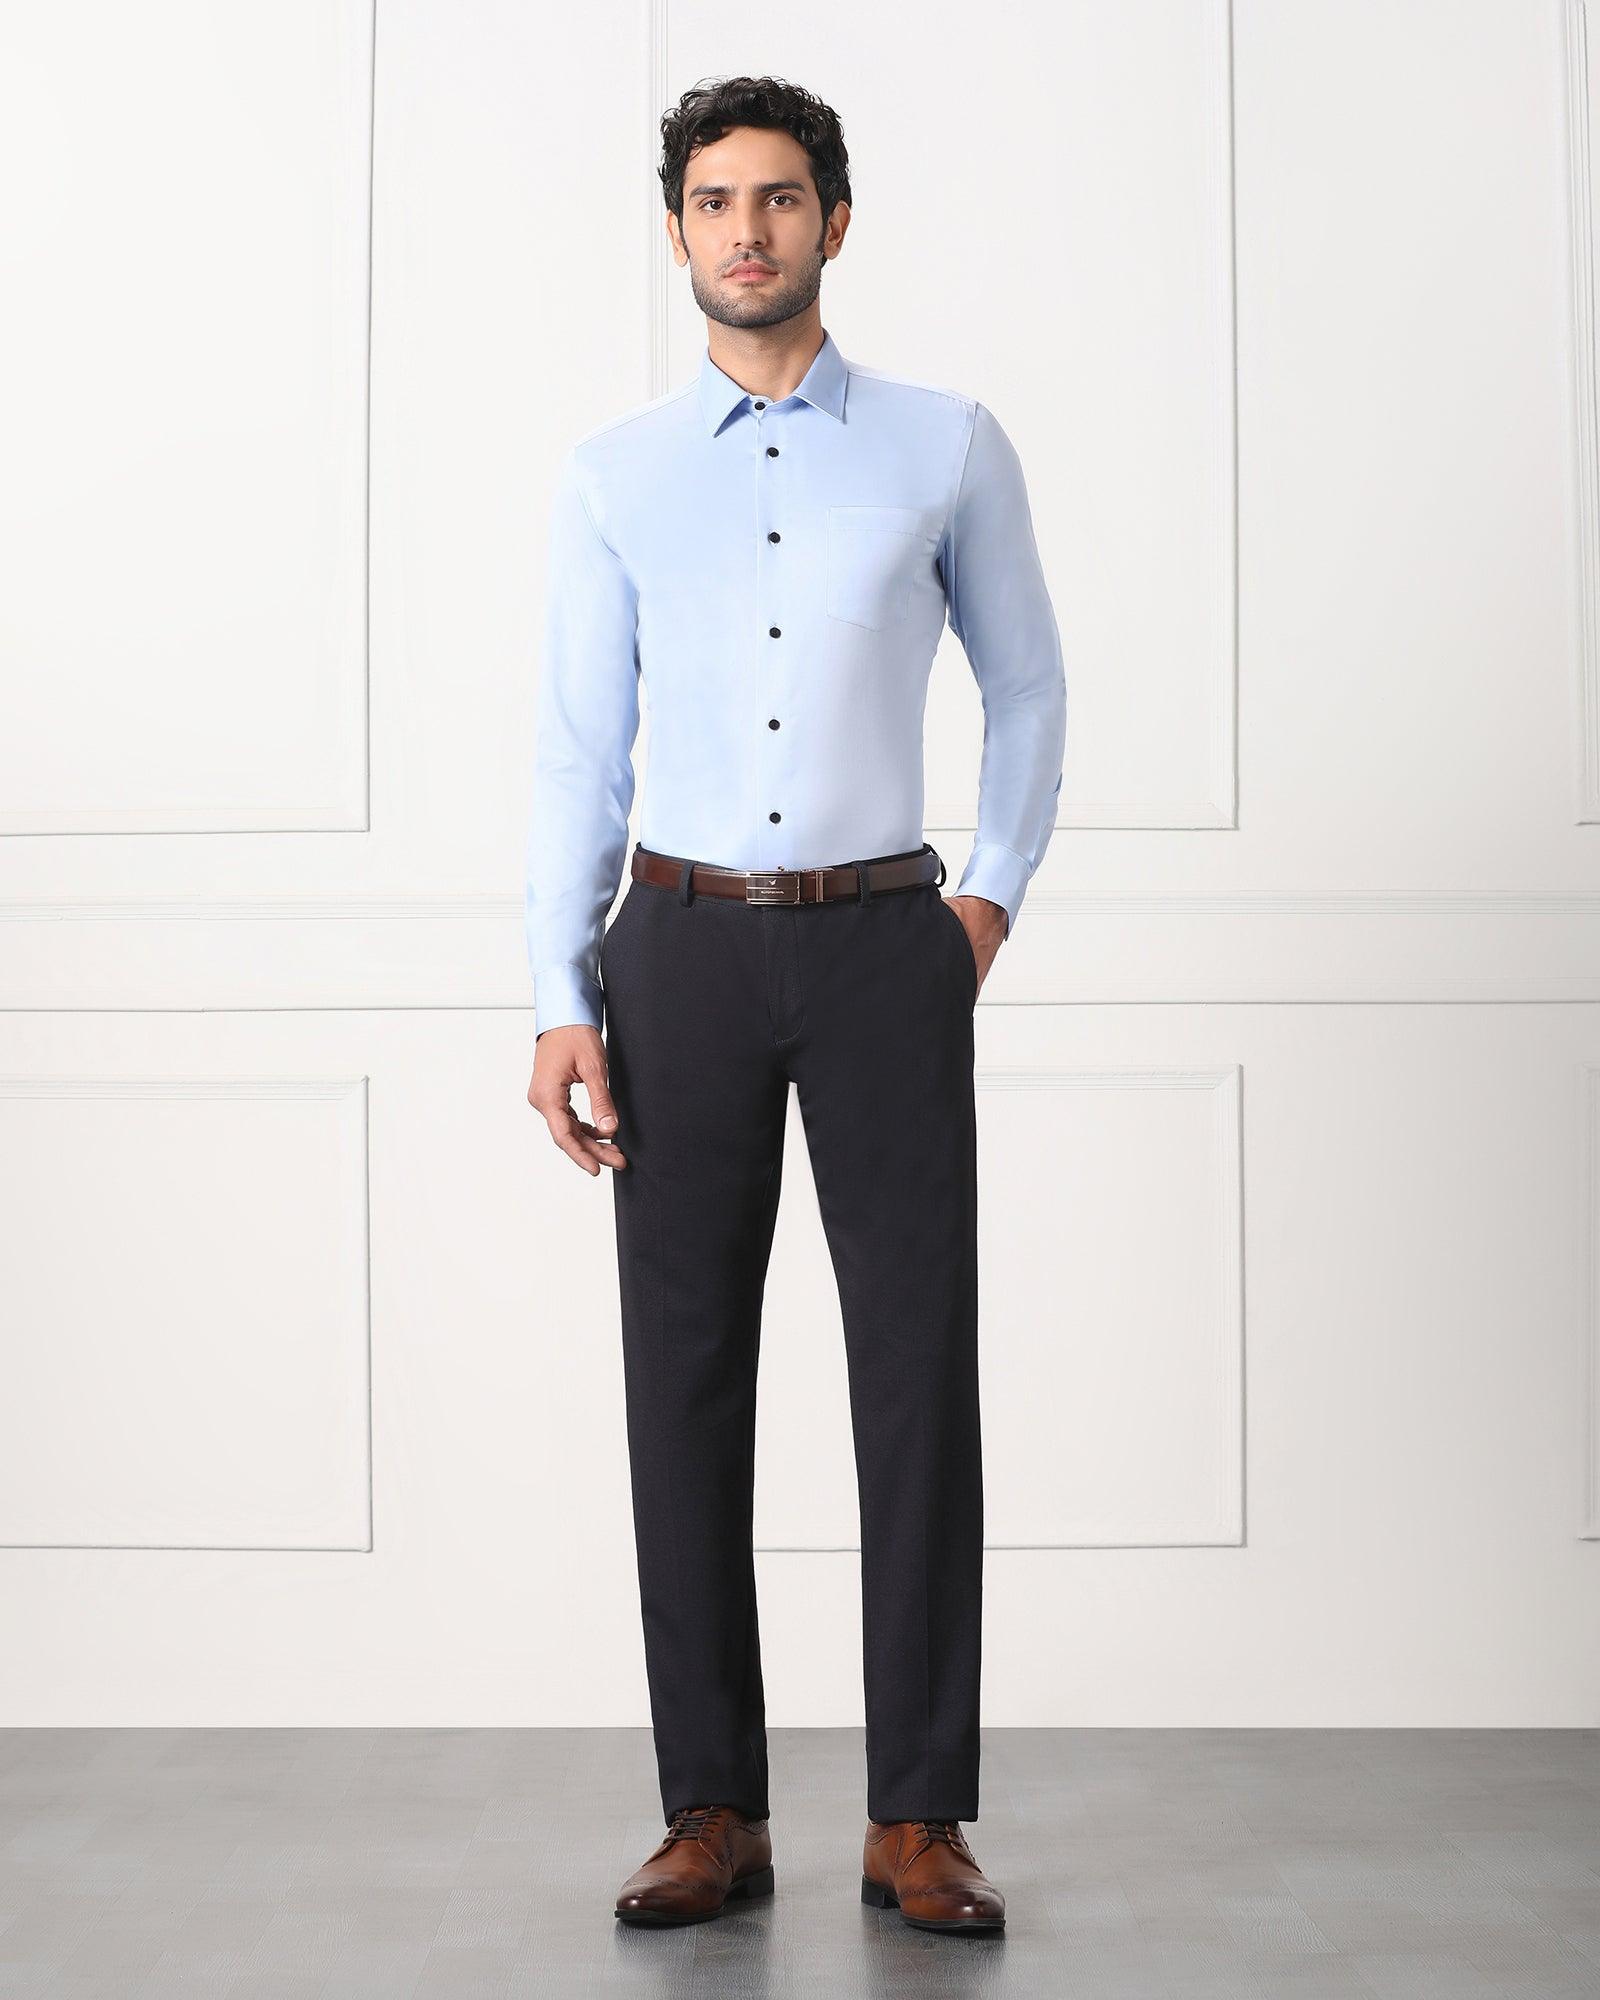 Blue Dress Pants Outfits For Men (1200+ ideas & outfits) | Lookastic